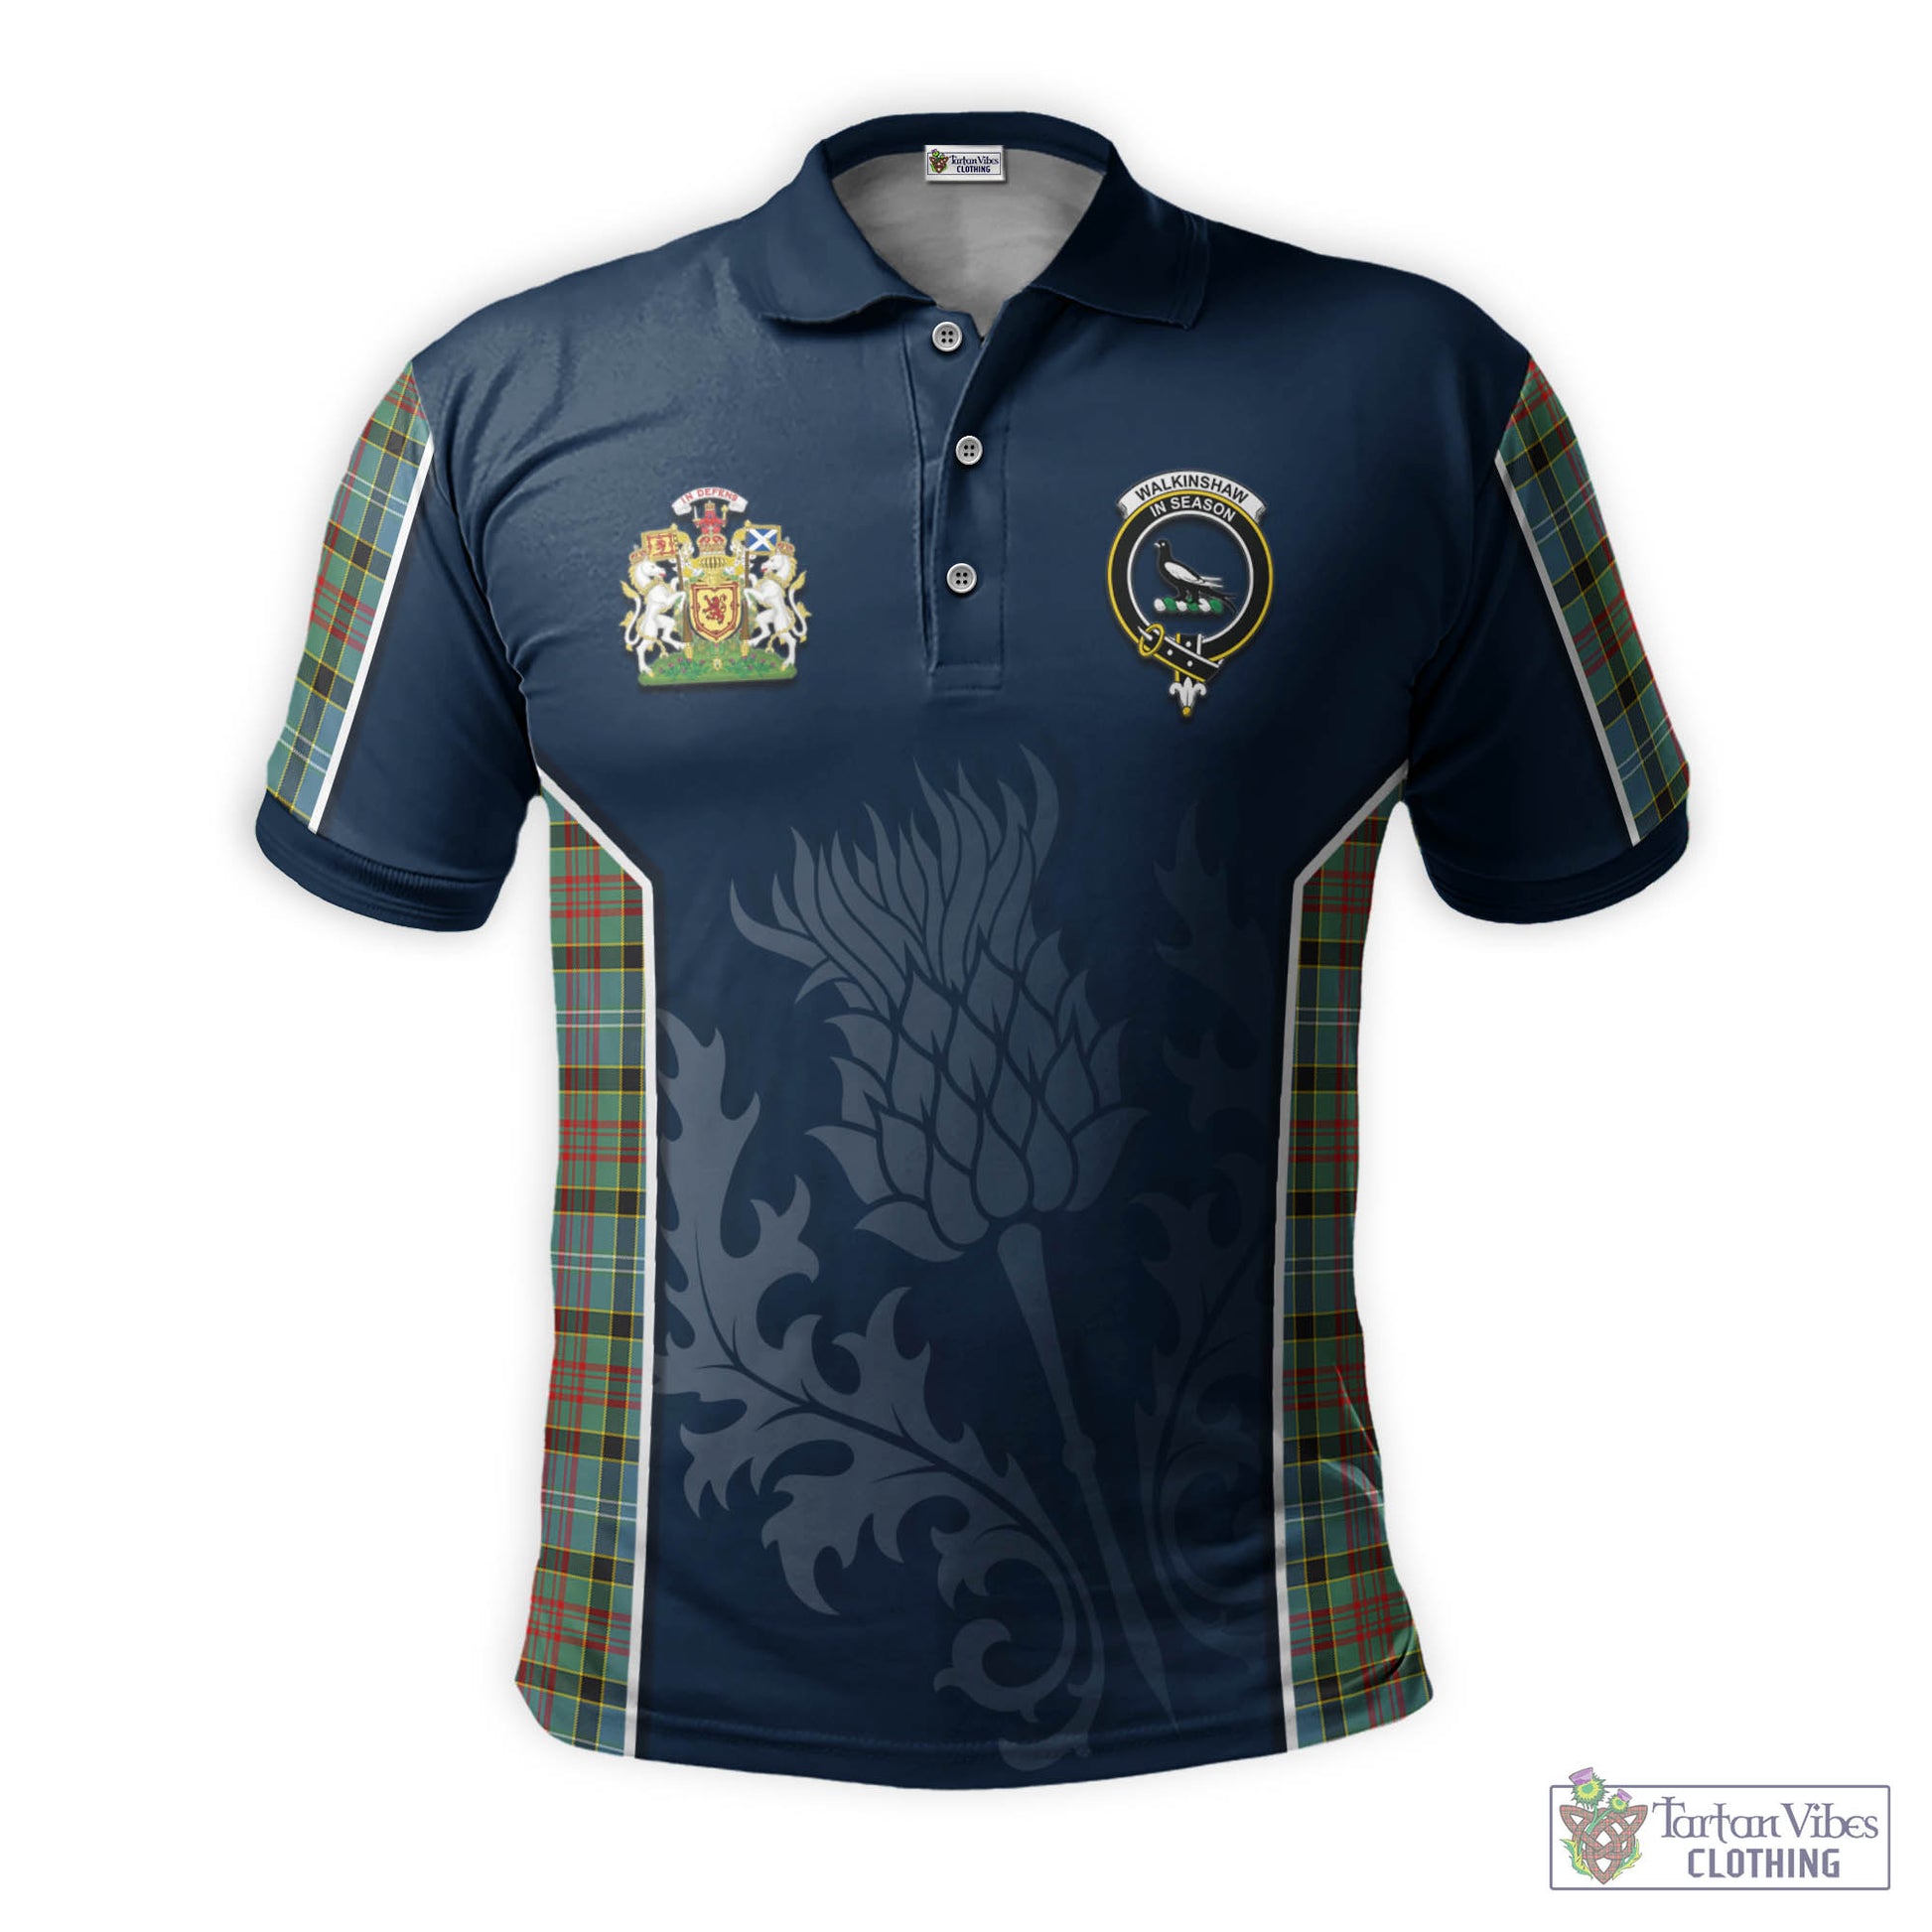 Tartan Vibes Clothing Walkinshaw Tartan Men's Polo Shirt with Family Crest and Scottish Thistle Vibes Sport Style